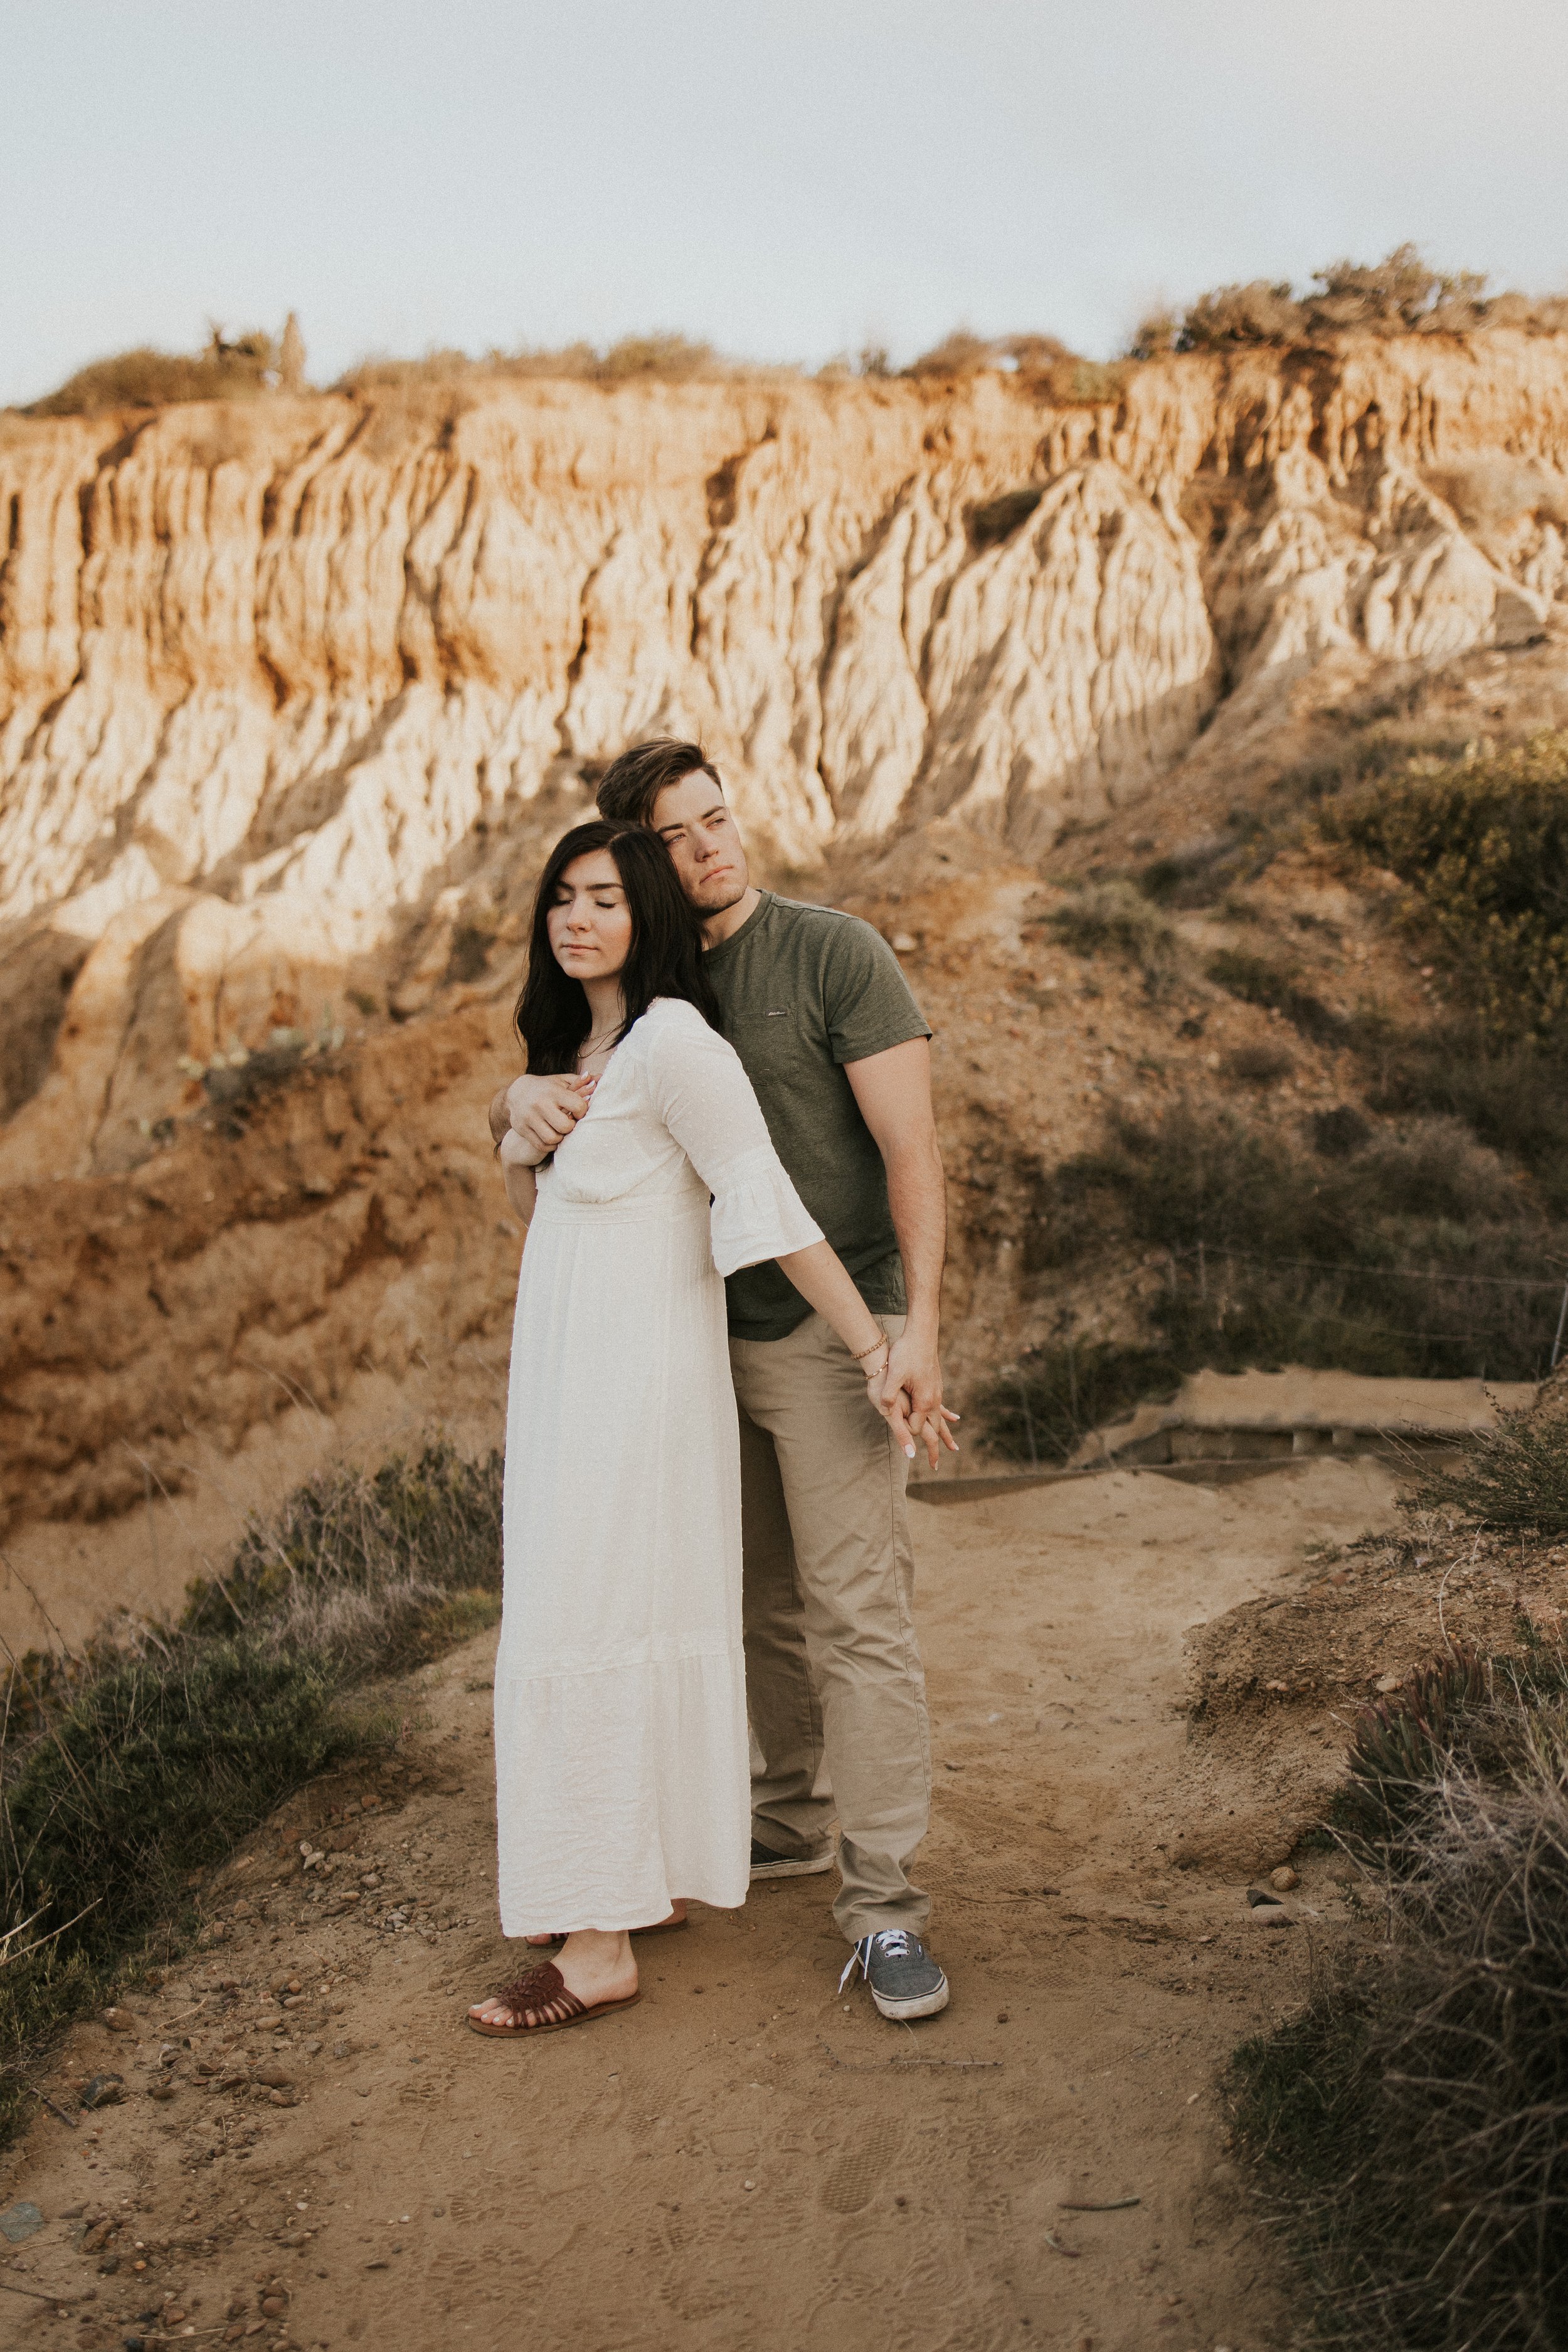 Torrey Pines State Park Engagement Photos in San Diego, California